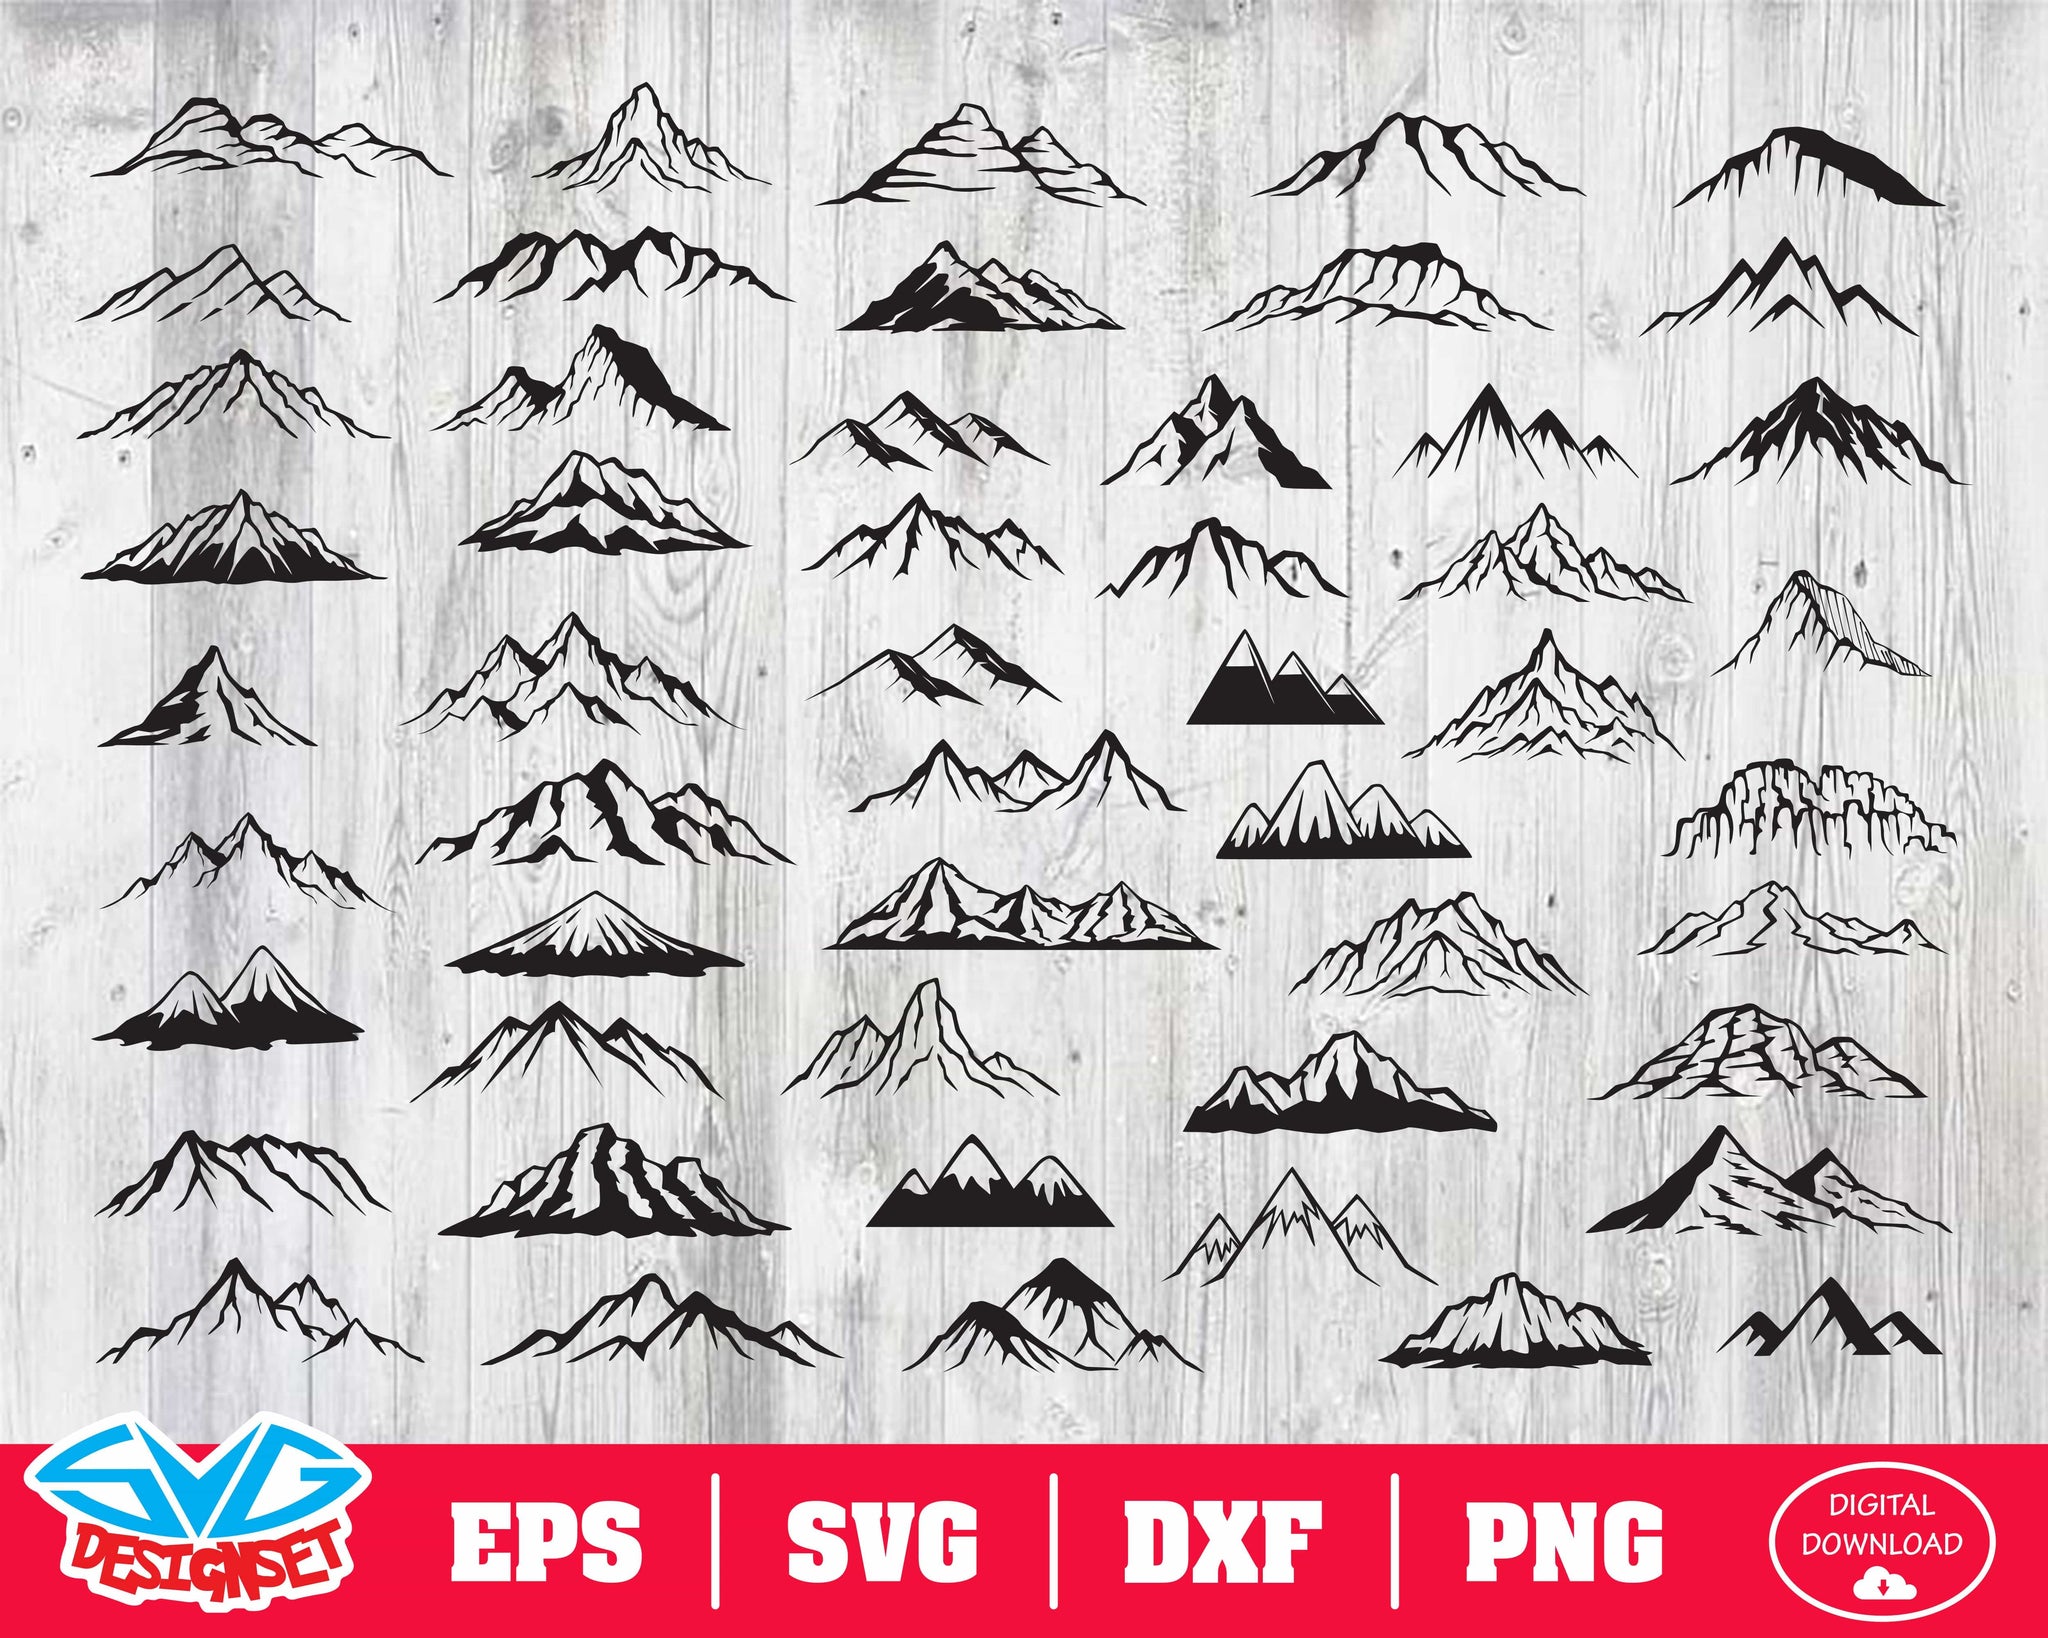 Mountains Svg, Dxf, Eps, Png, Clipart, Silhouette and Cutfiles - SVGDesignSets